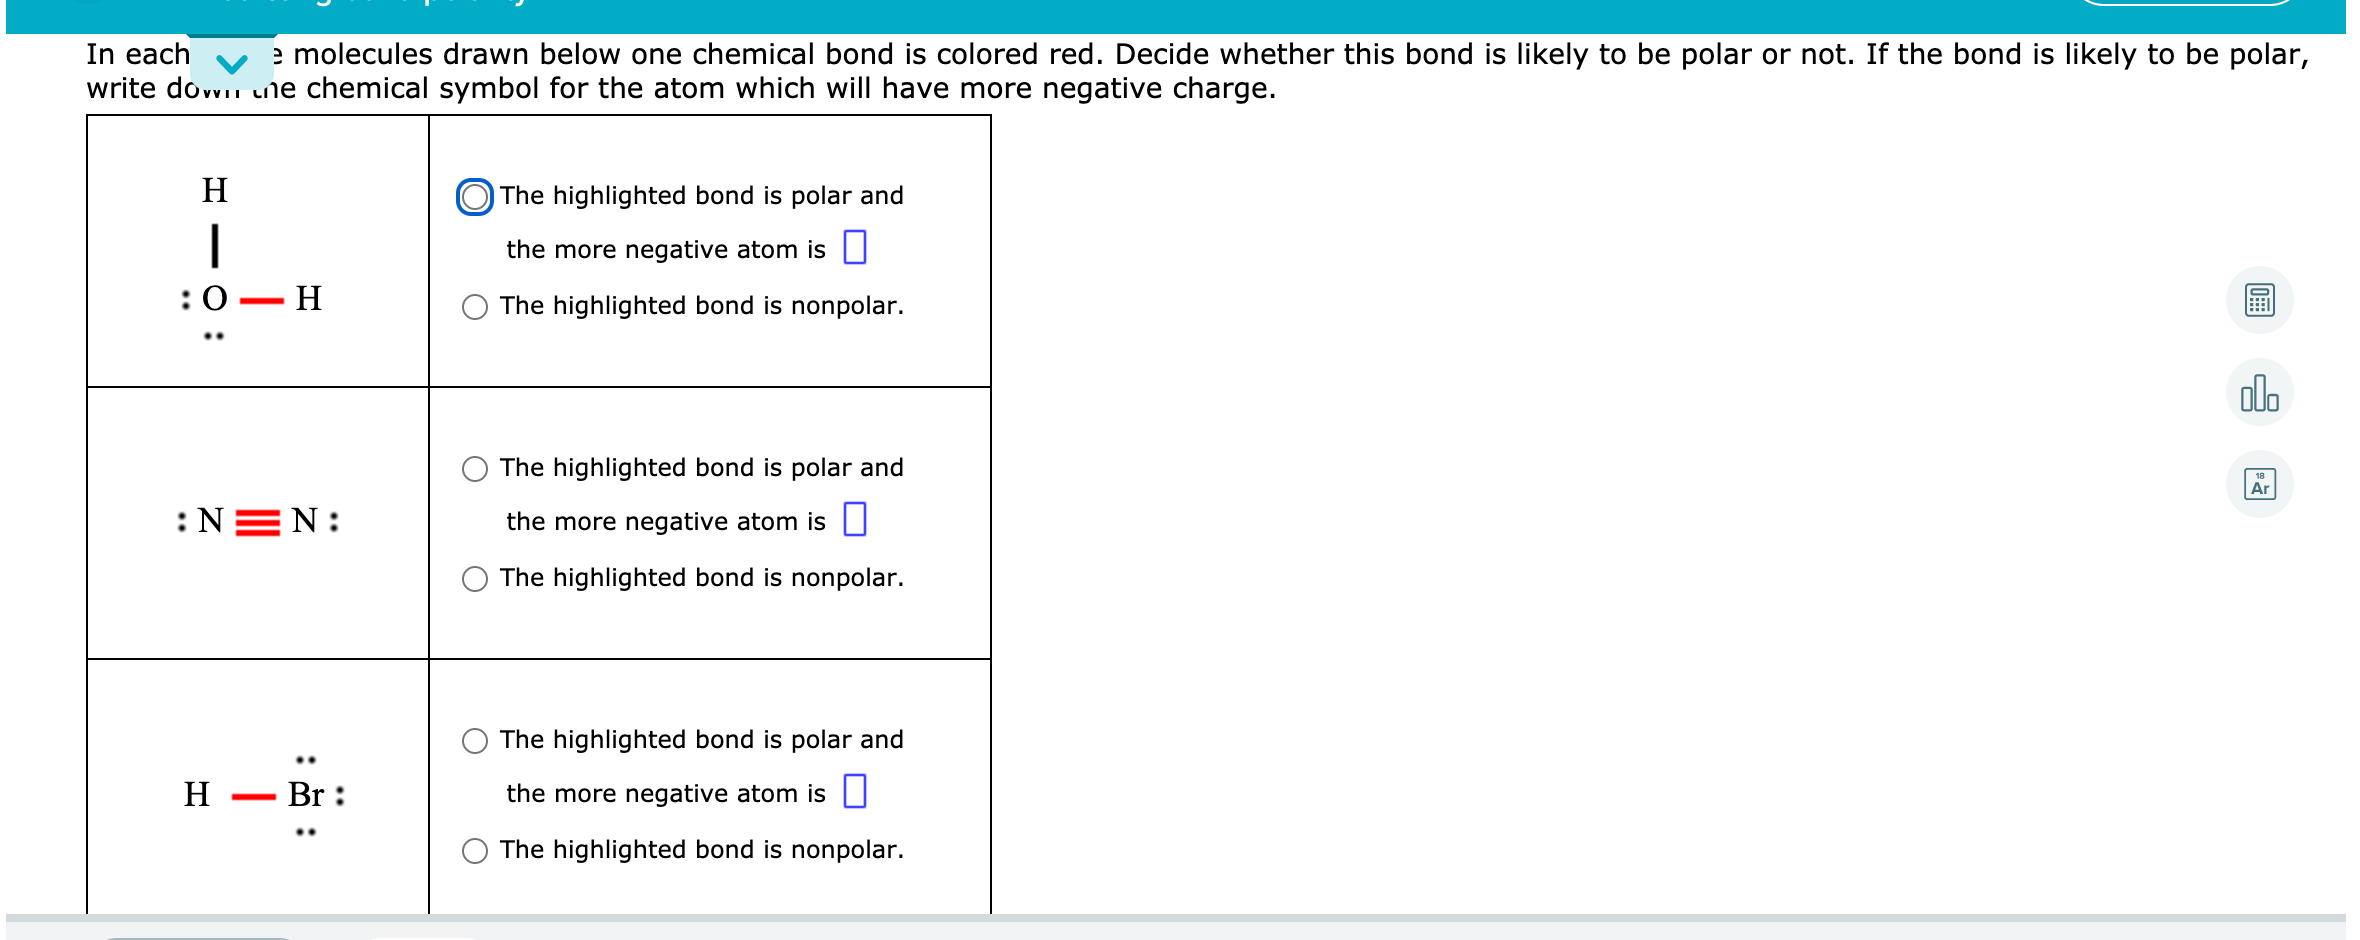 In each
write dovvii une chemical symbol for the atom which will have more negative charge.
e molecules drawn below one chemical bond is colored red. Decide whether this bond is likely to be polar or not. If the bond is likely to be polar,
H
O The highlighted bond is polar and
|
the more negative atom is |
:0 — Н
The highlighted bond is nonpolar.
olo
The highlighted bond is polar and
Ar
:NEN:
the more negative atom is |
The highlighted bond is nonpolar.
The highlighted bond is polar and
H
Br :
the more negative atom is U
The highlighted bond is nonpolar.
: :
